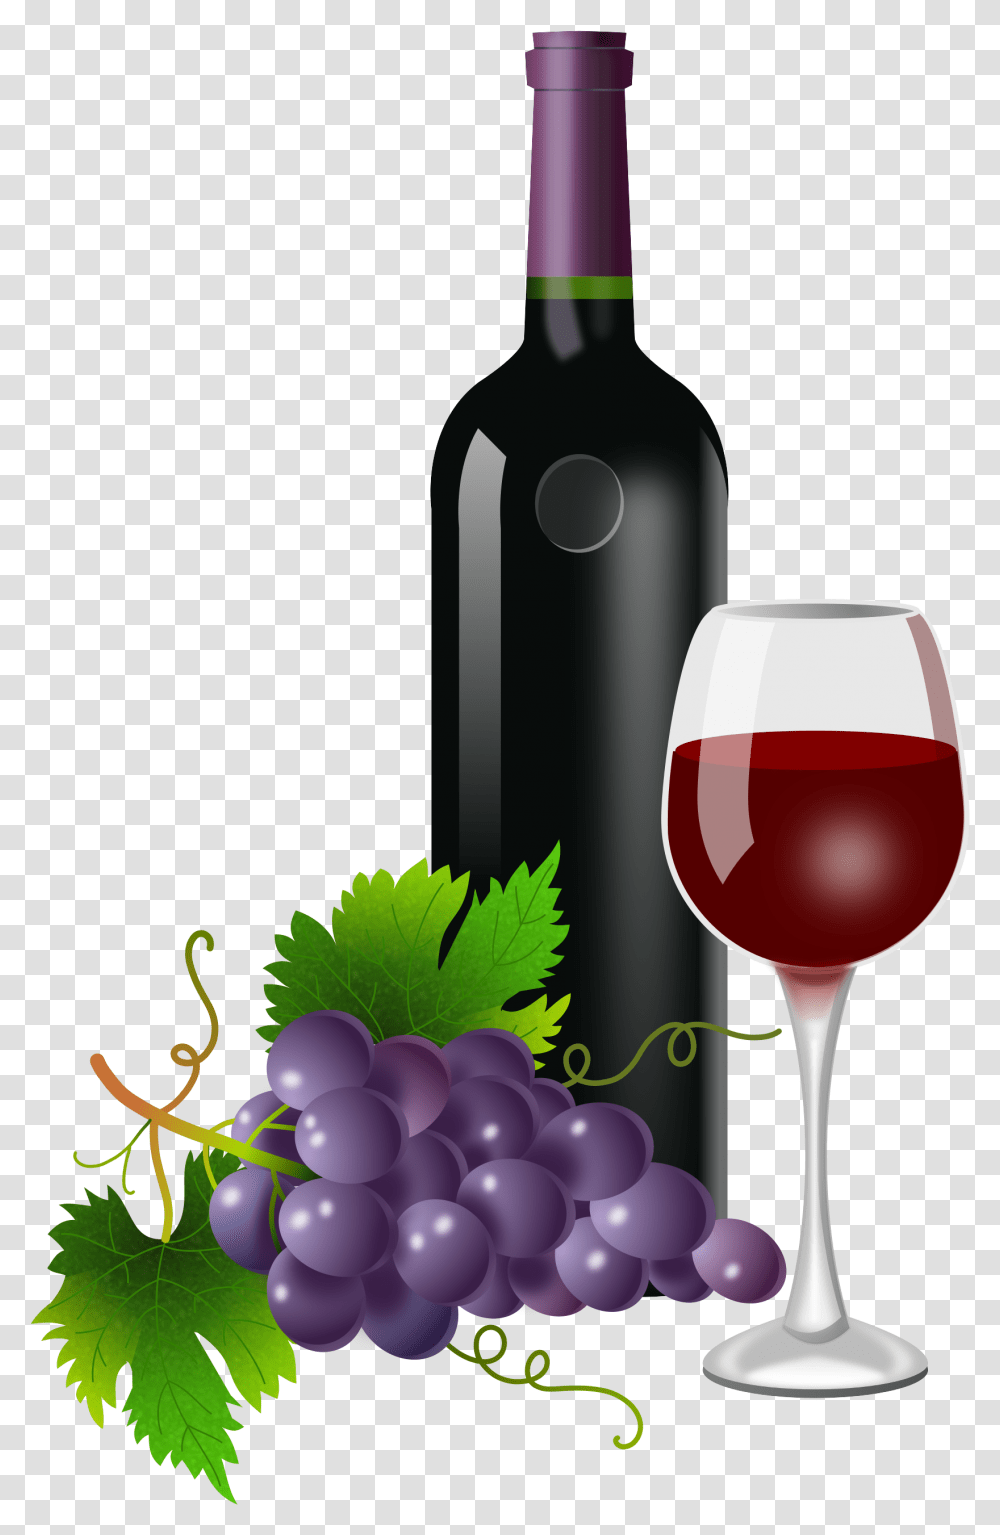 Wine Glass And Bottle, Alcohol, Beverage, Drink, Red Wine Transparent Png